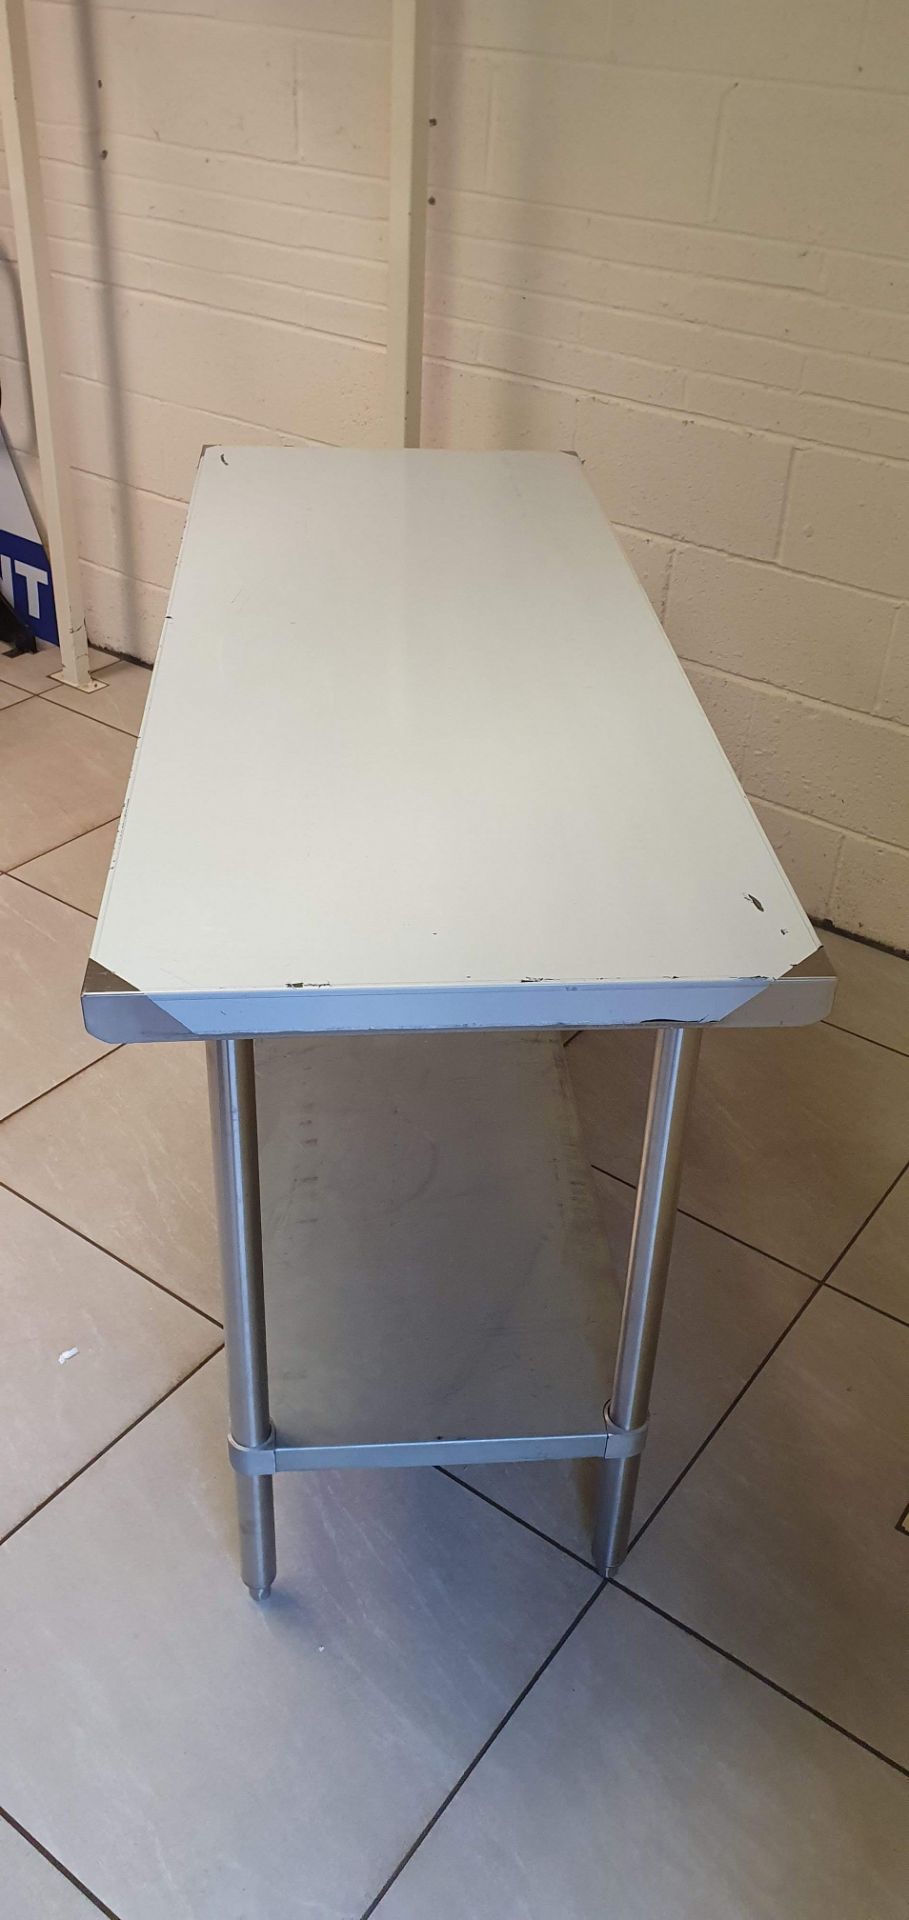 Stainless Steel Table - Heavy Duty - Image 2 of 2